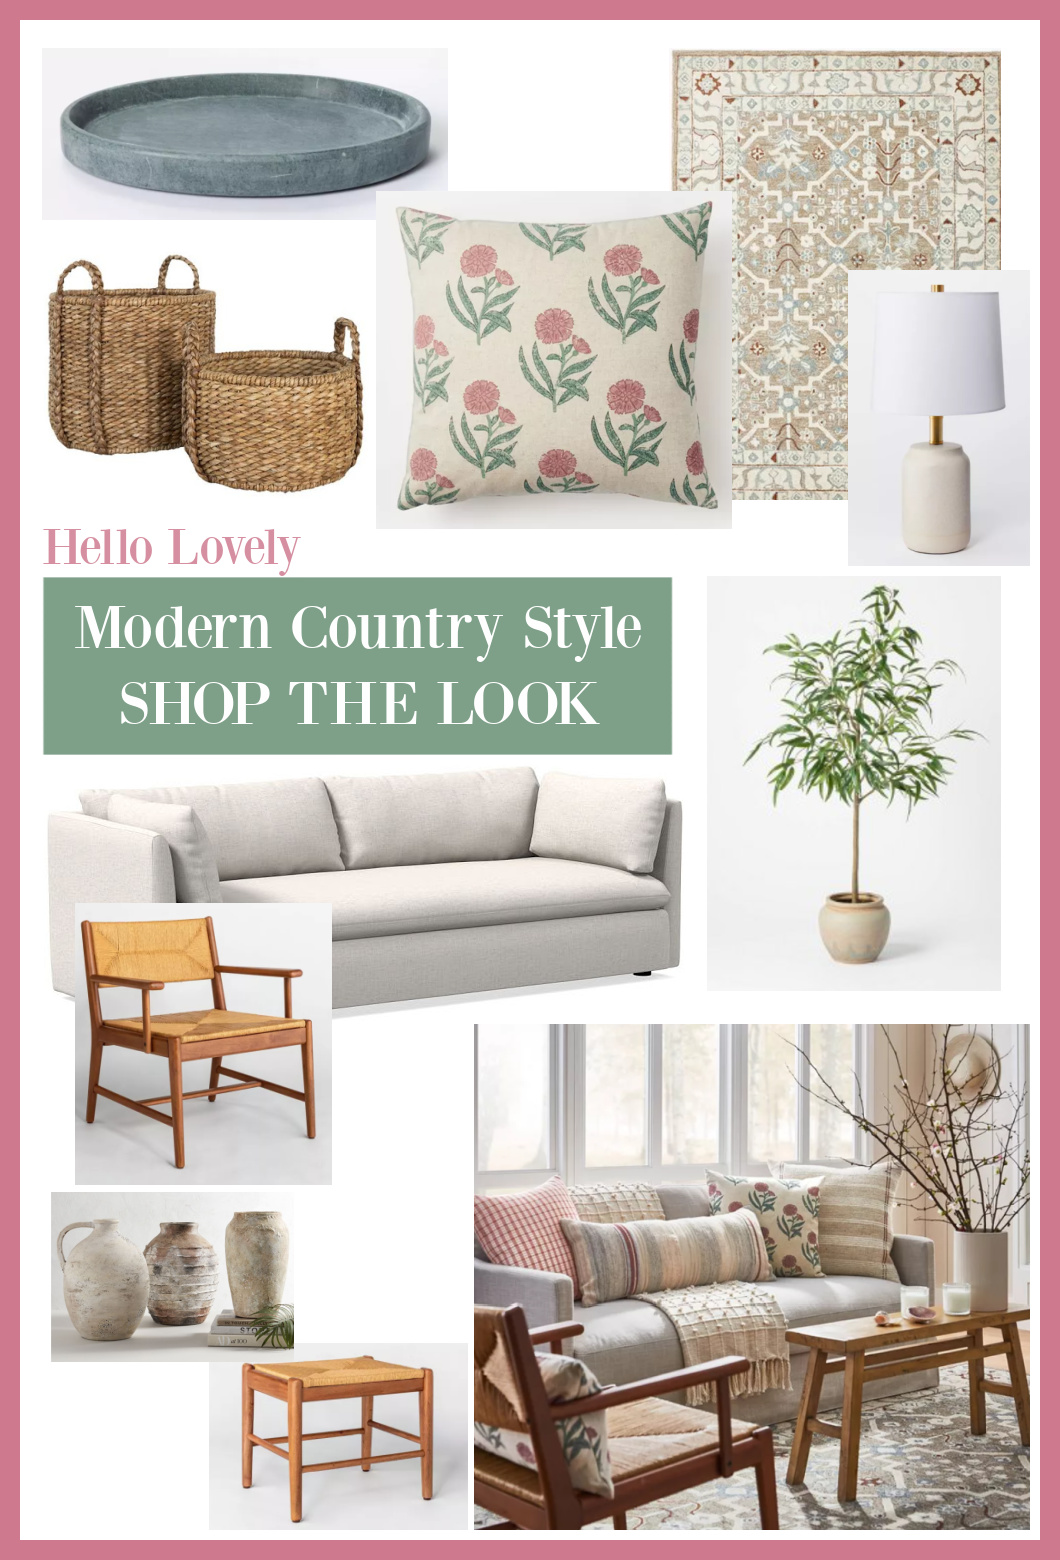 Hello Lovely Modern Country Style Shop the Look - affordable furniture and decor options to consider now!